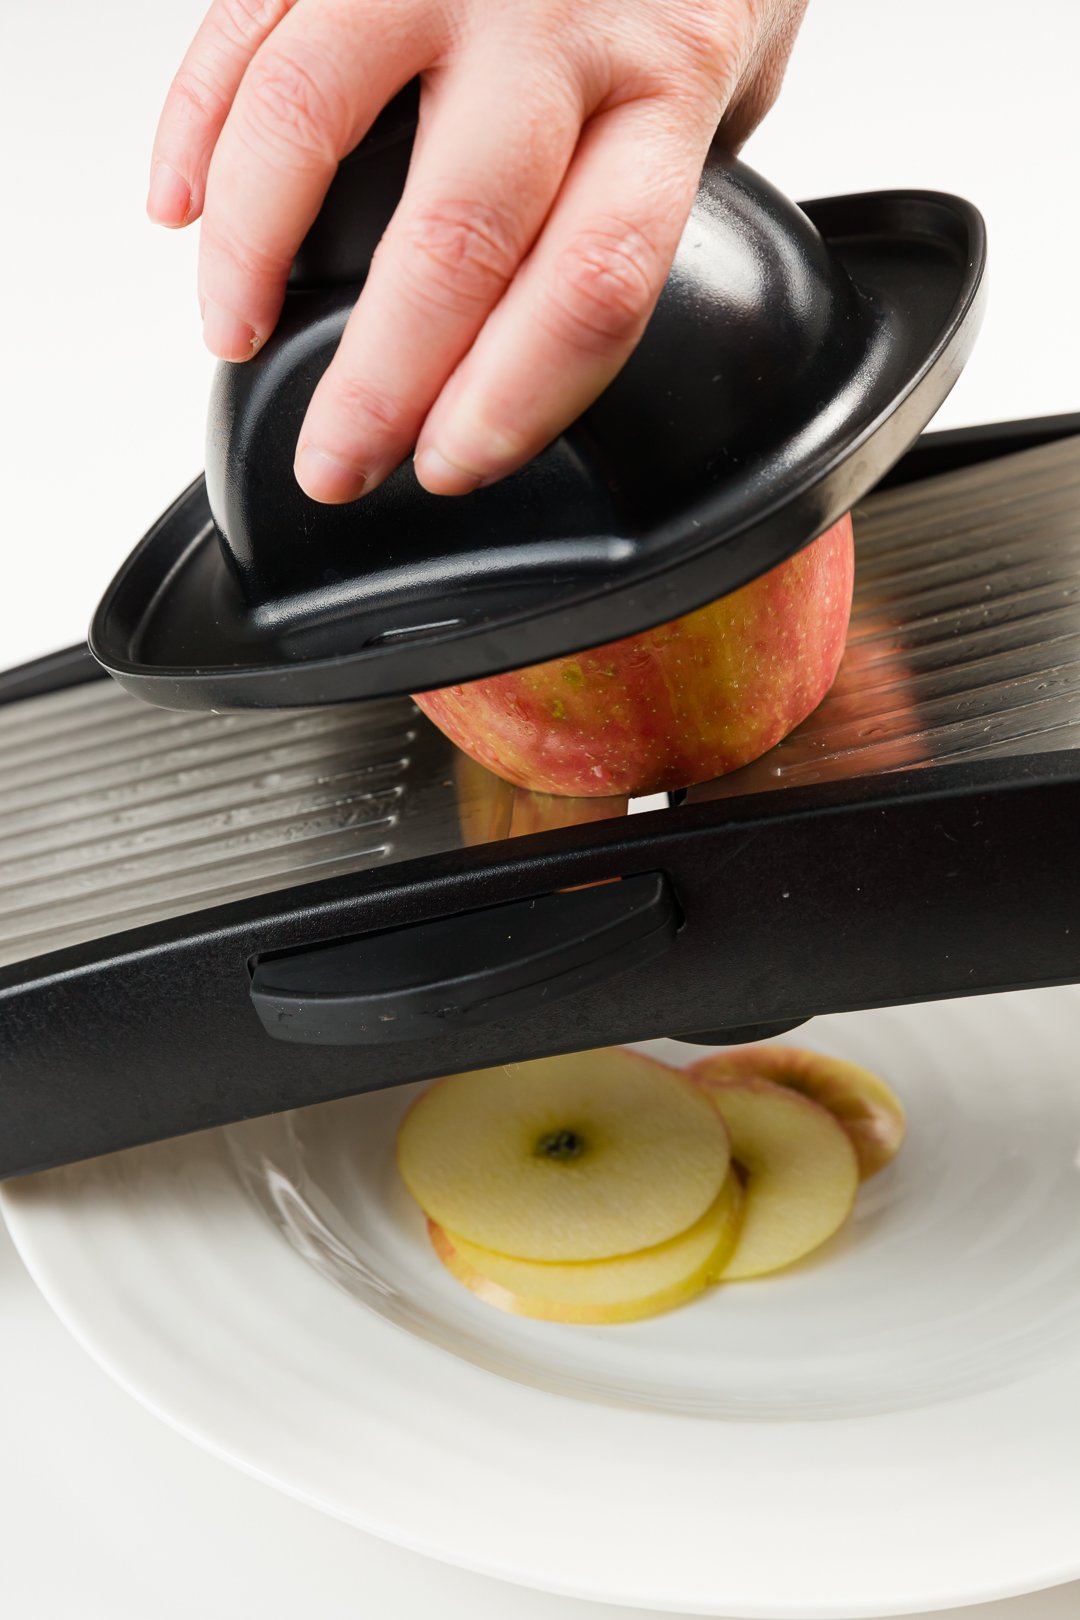 slicing apples with a mandoline